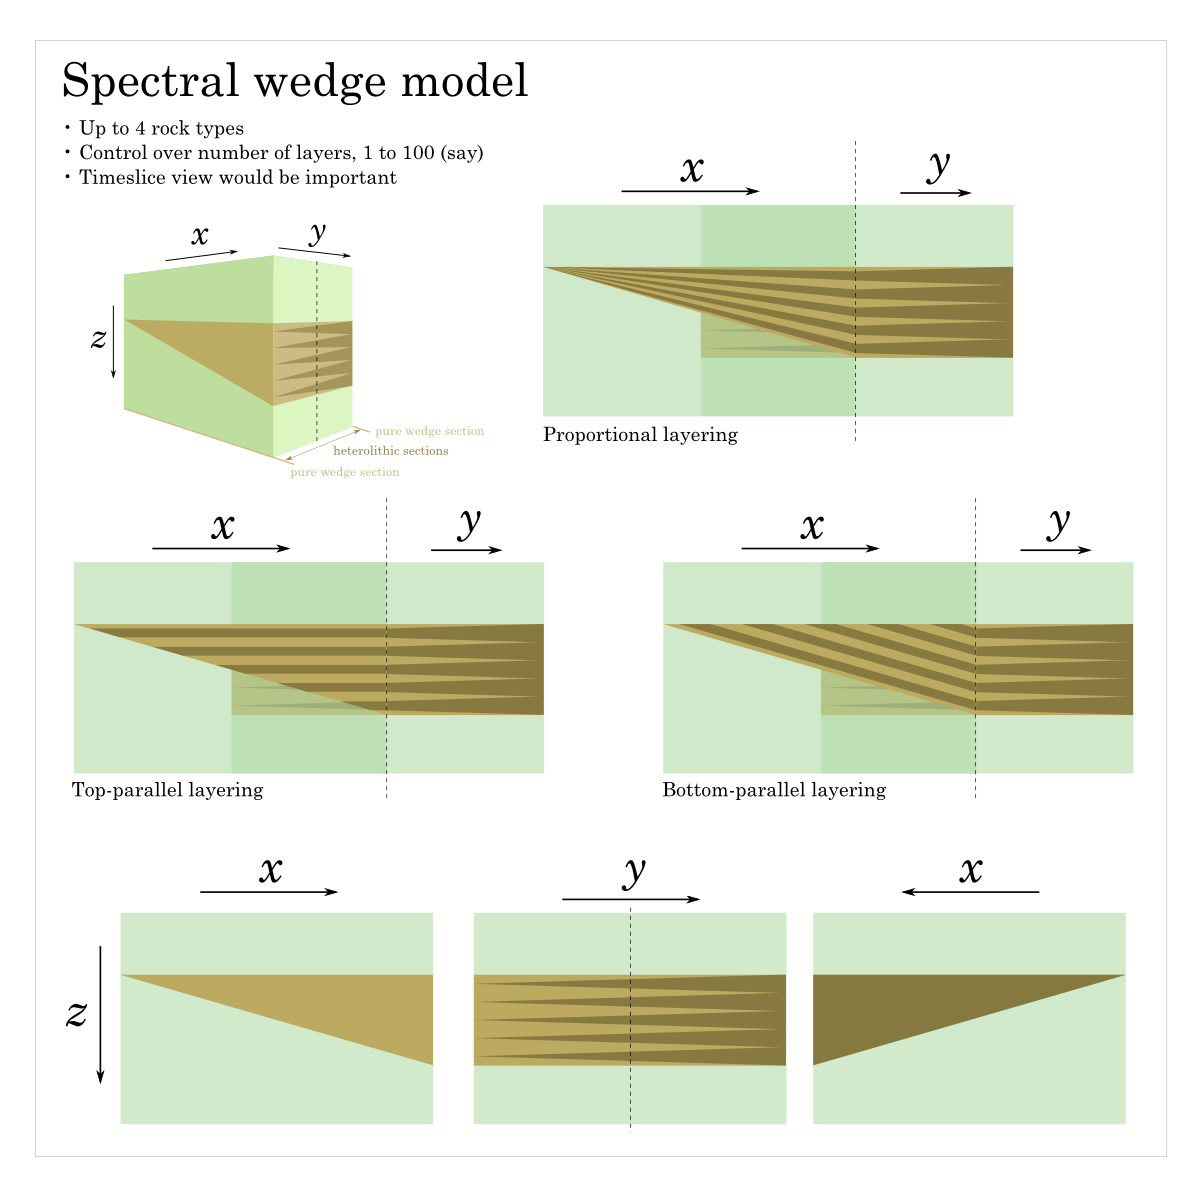 Spectral_wedge_model_concept.png